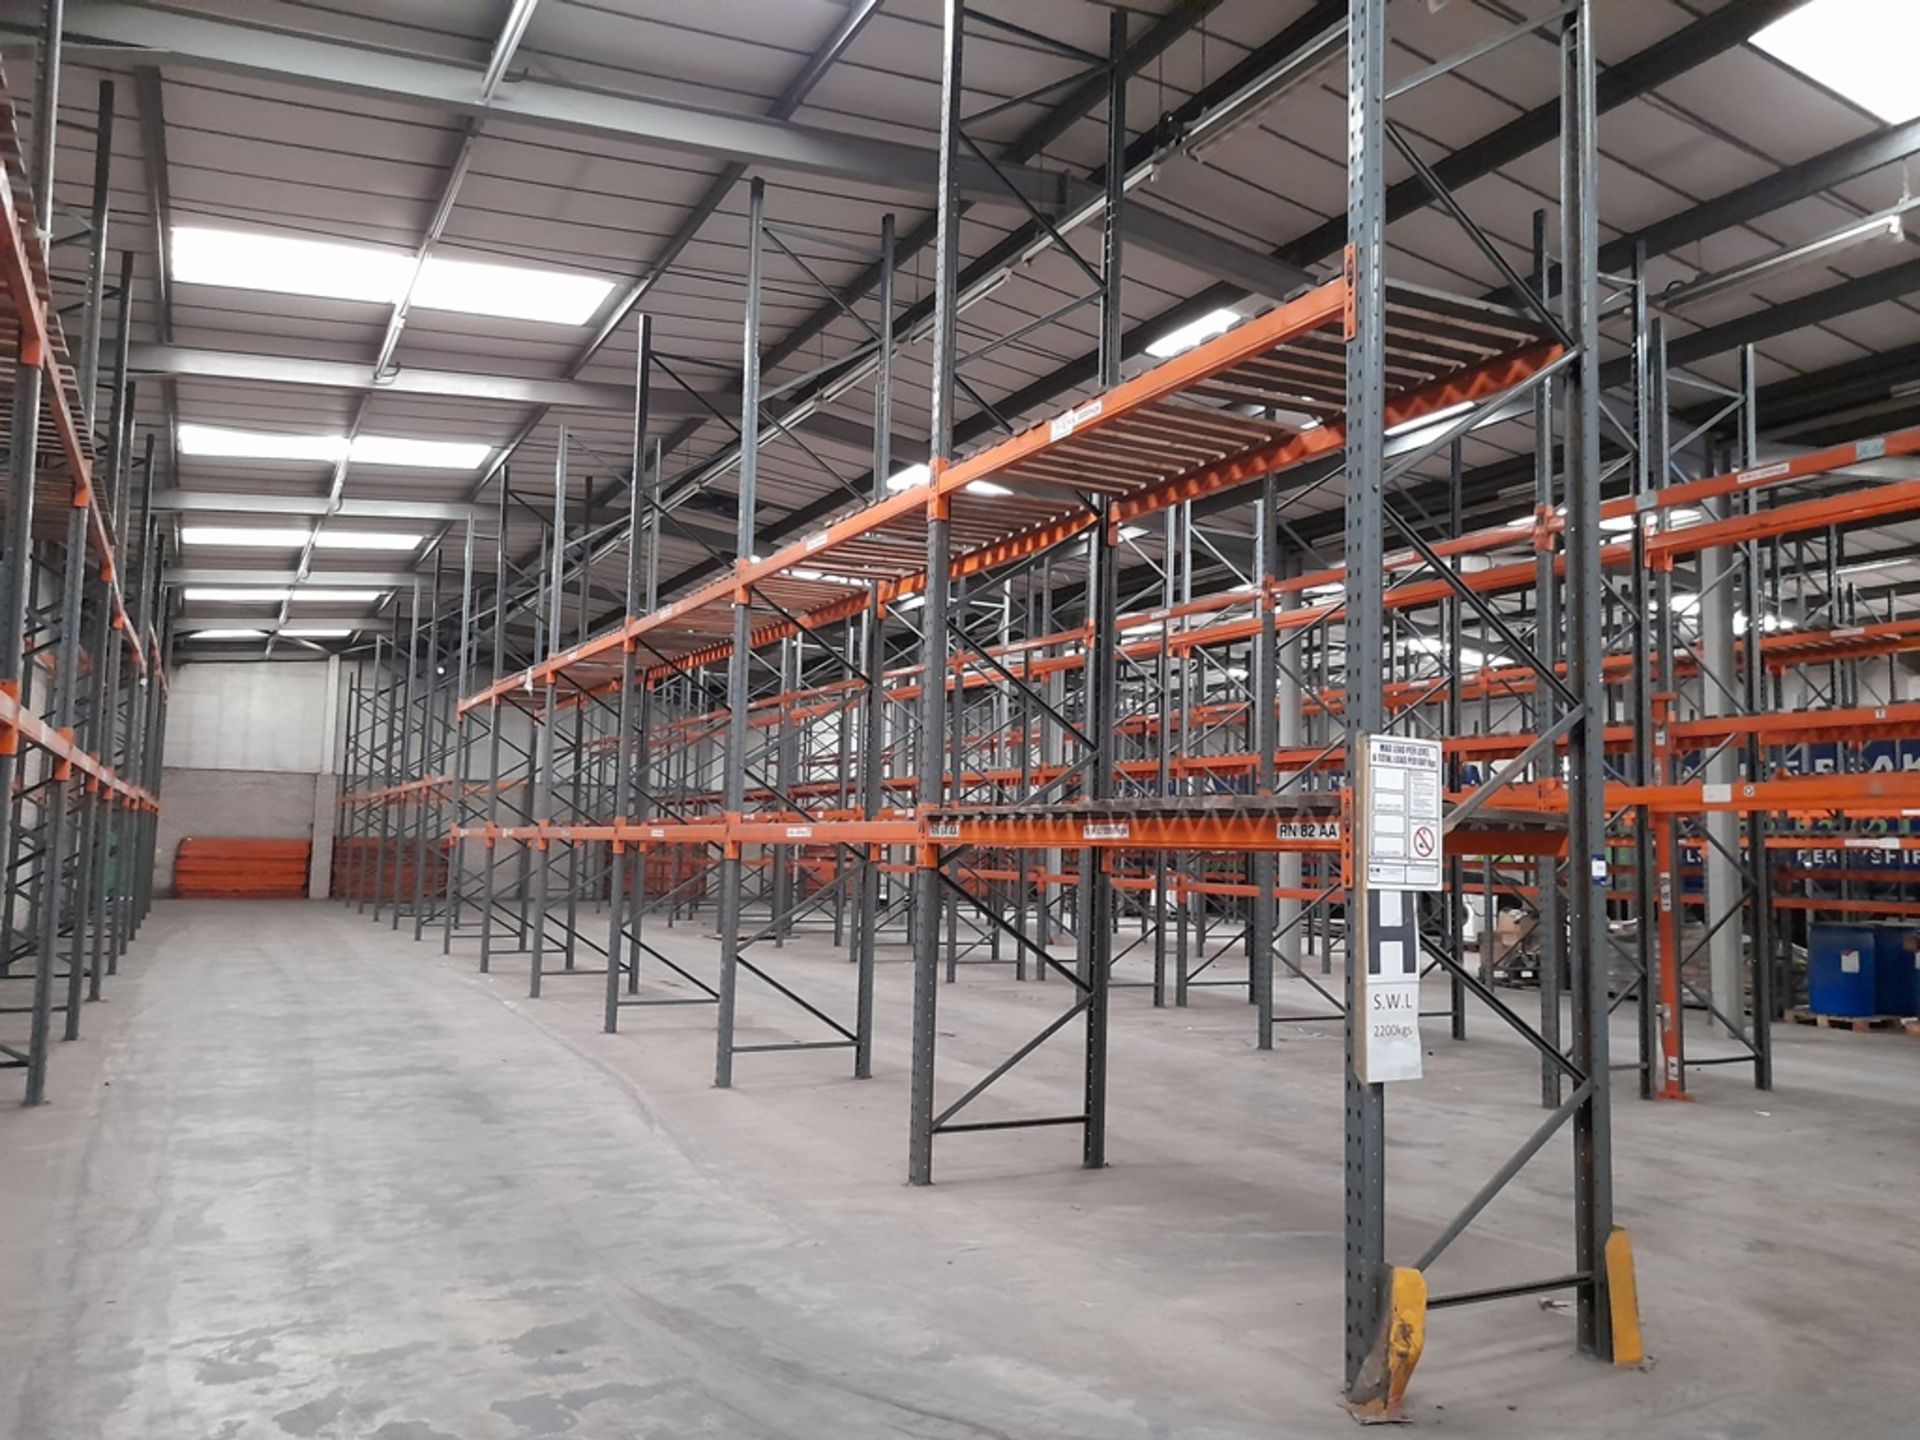 24 bays of DEXION industrial pallet racking, heigh - Image 4 of 8